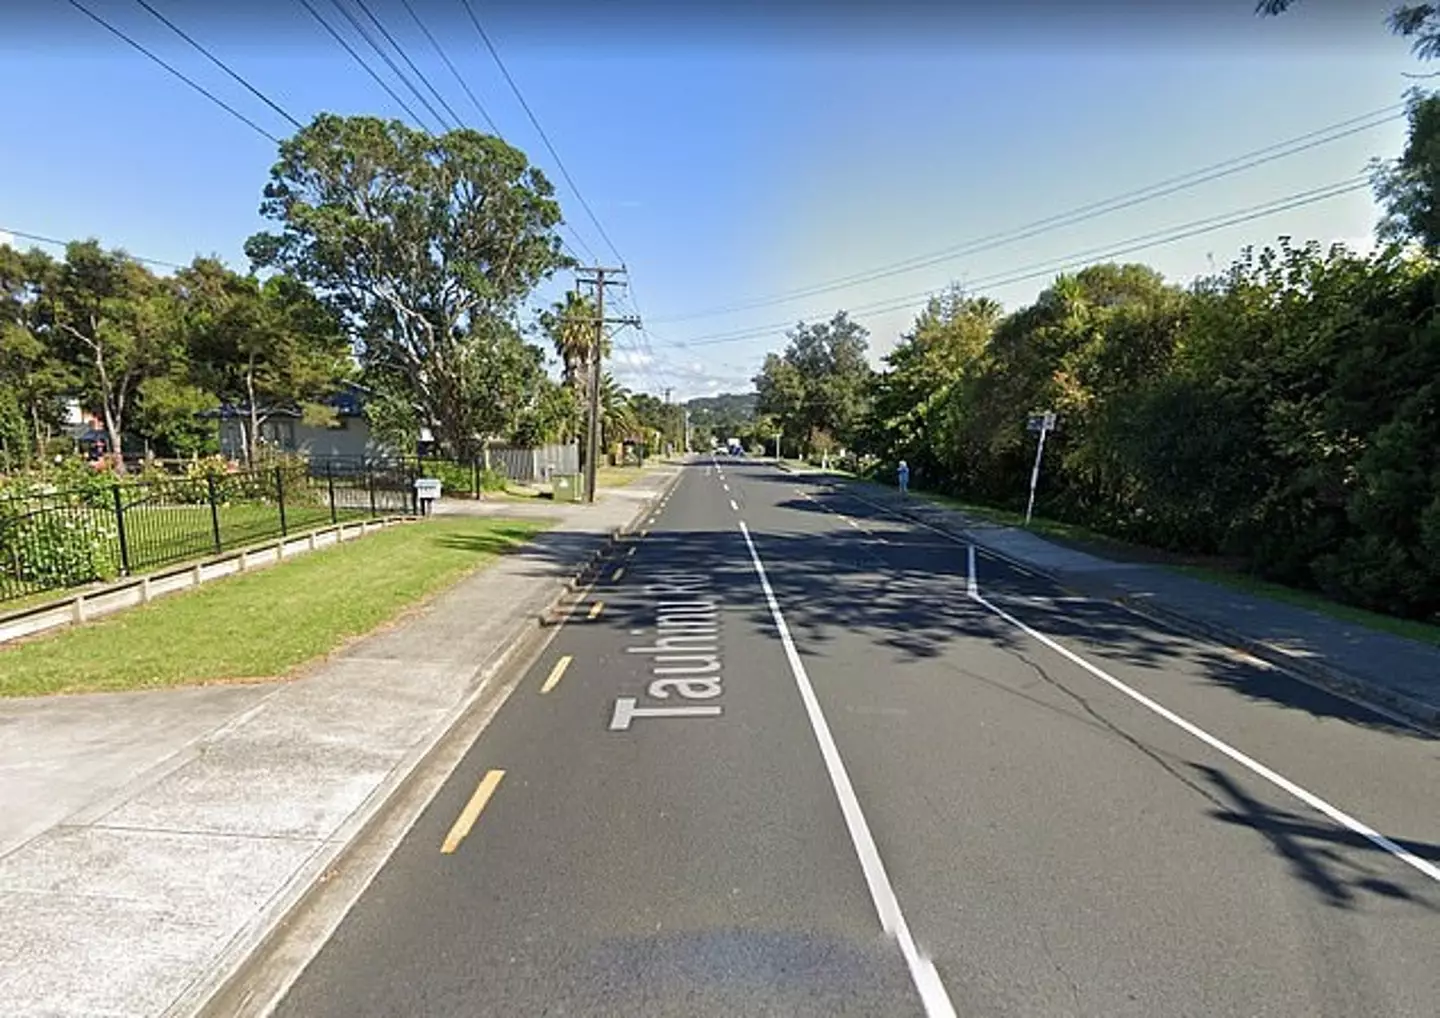 A New Zealand man has died after being electrocuted at a construction worksite in Greenhithe.